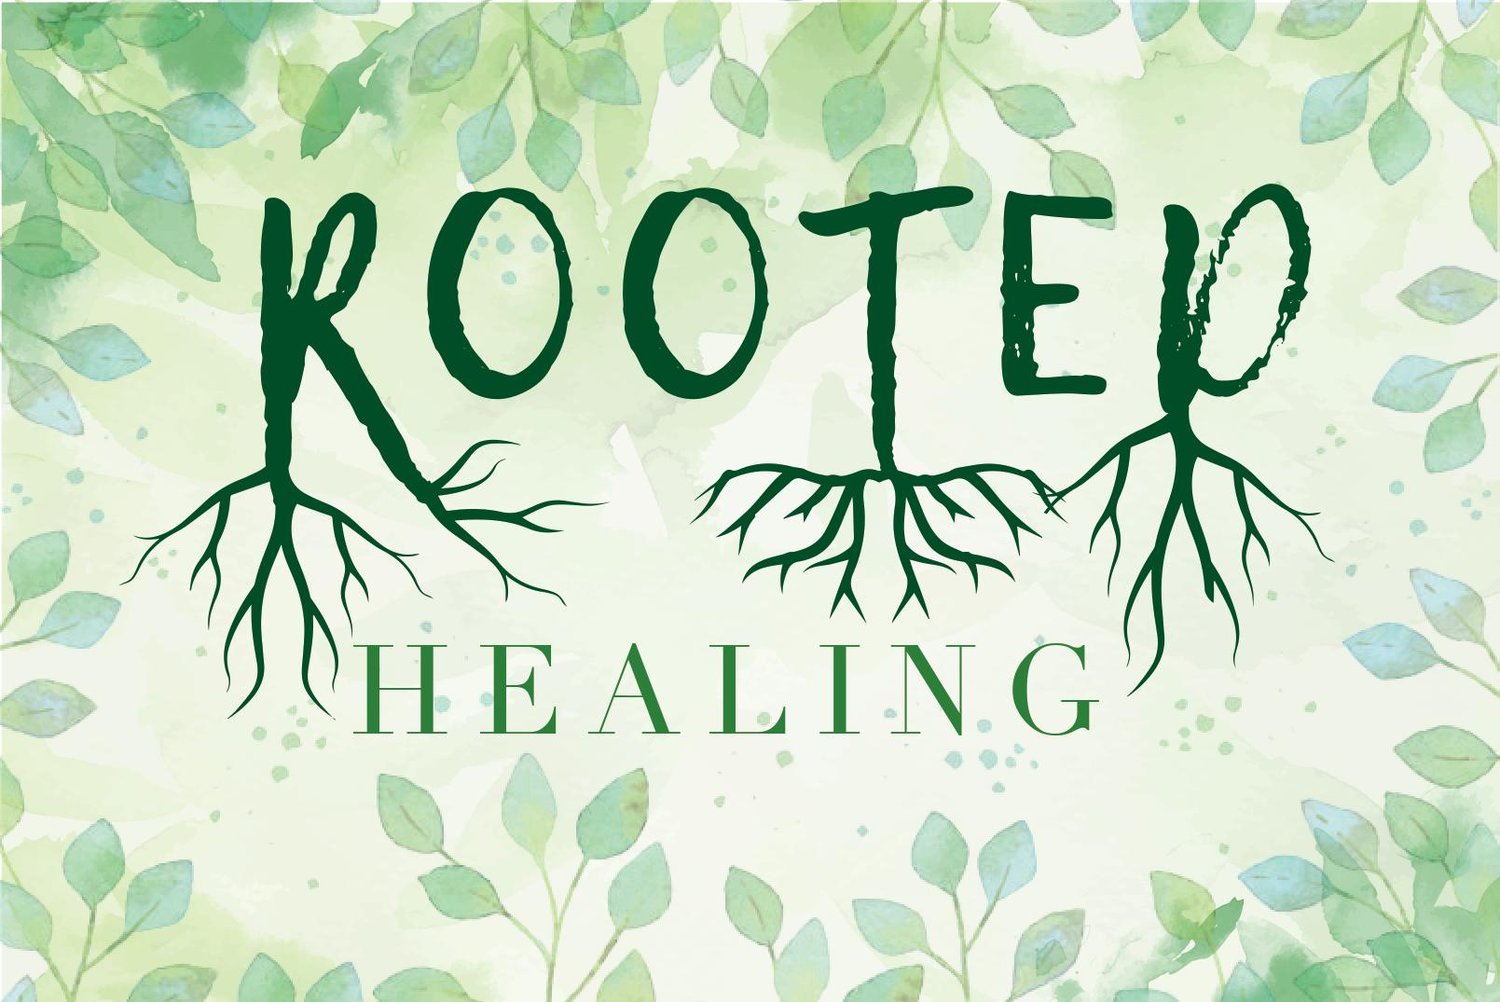 www.rooted-healing.com